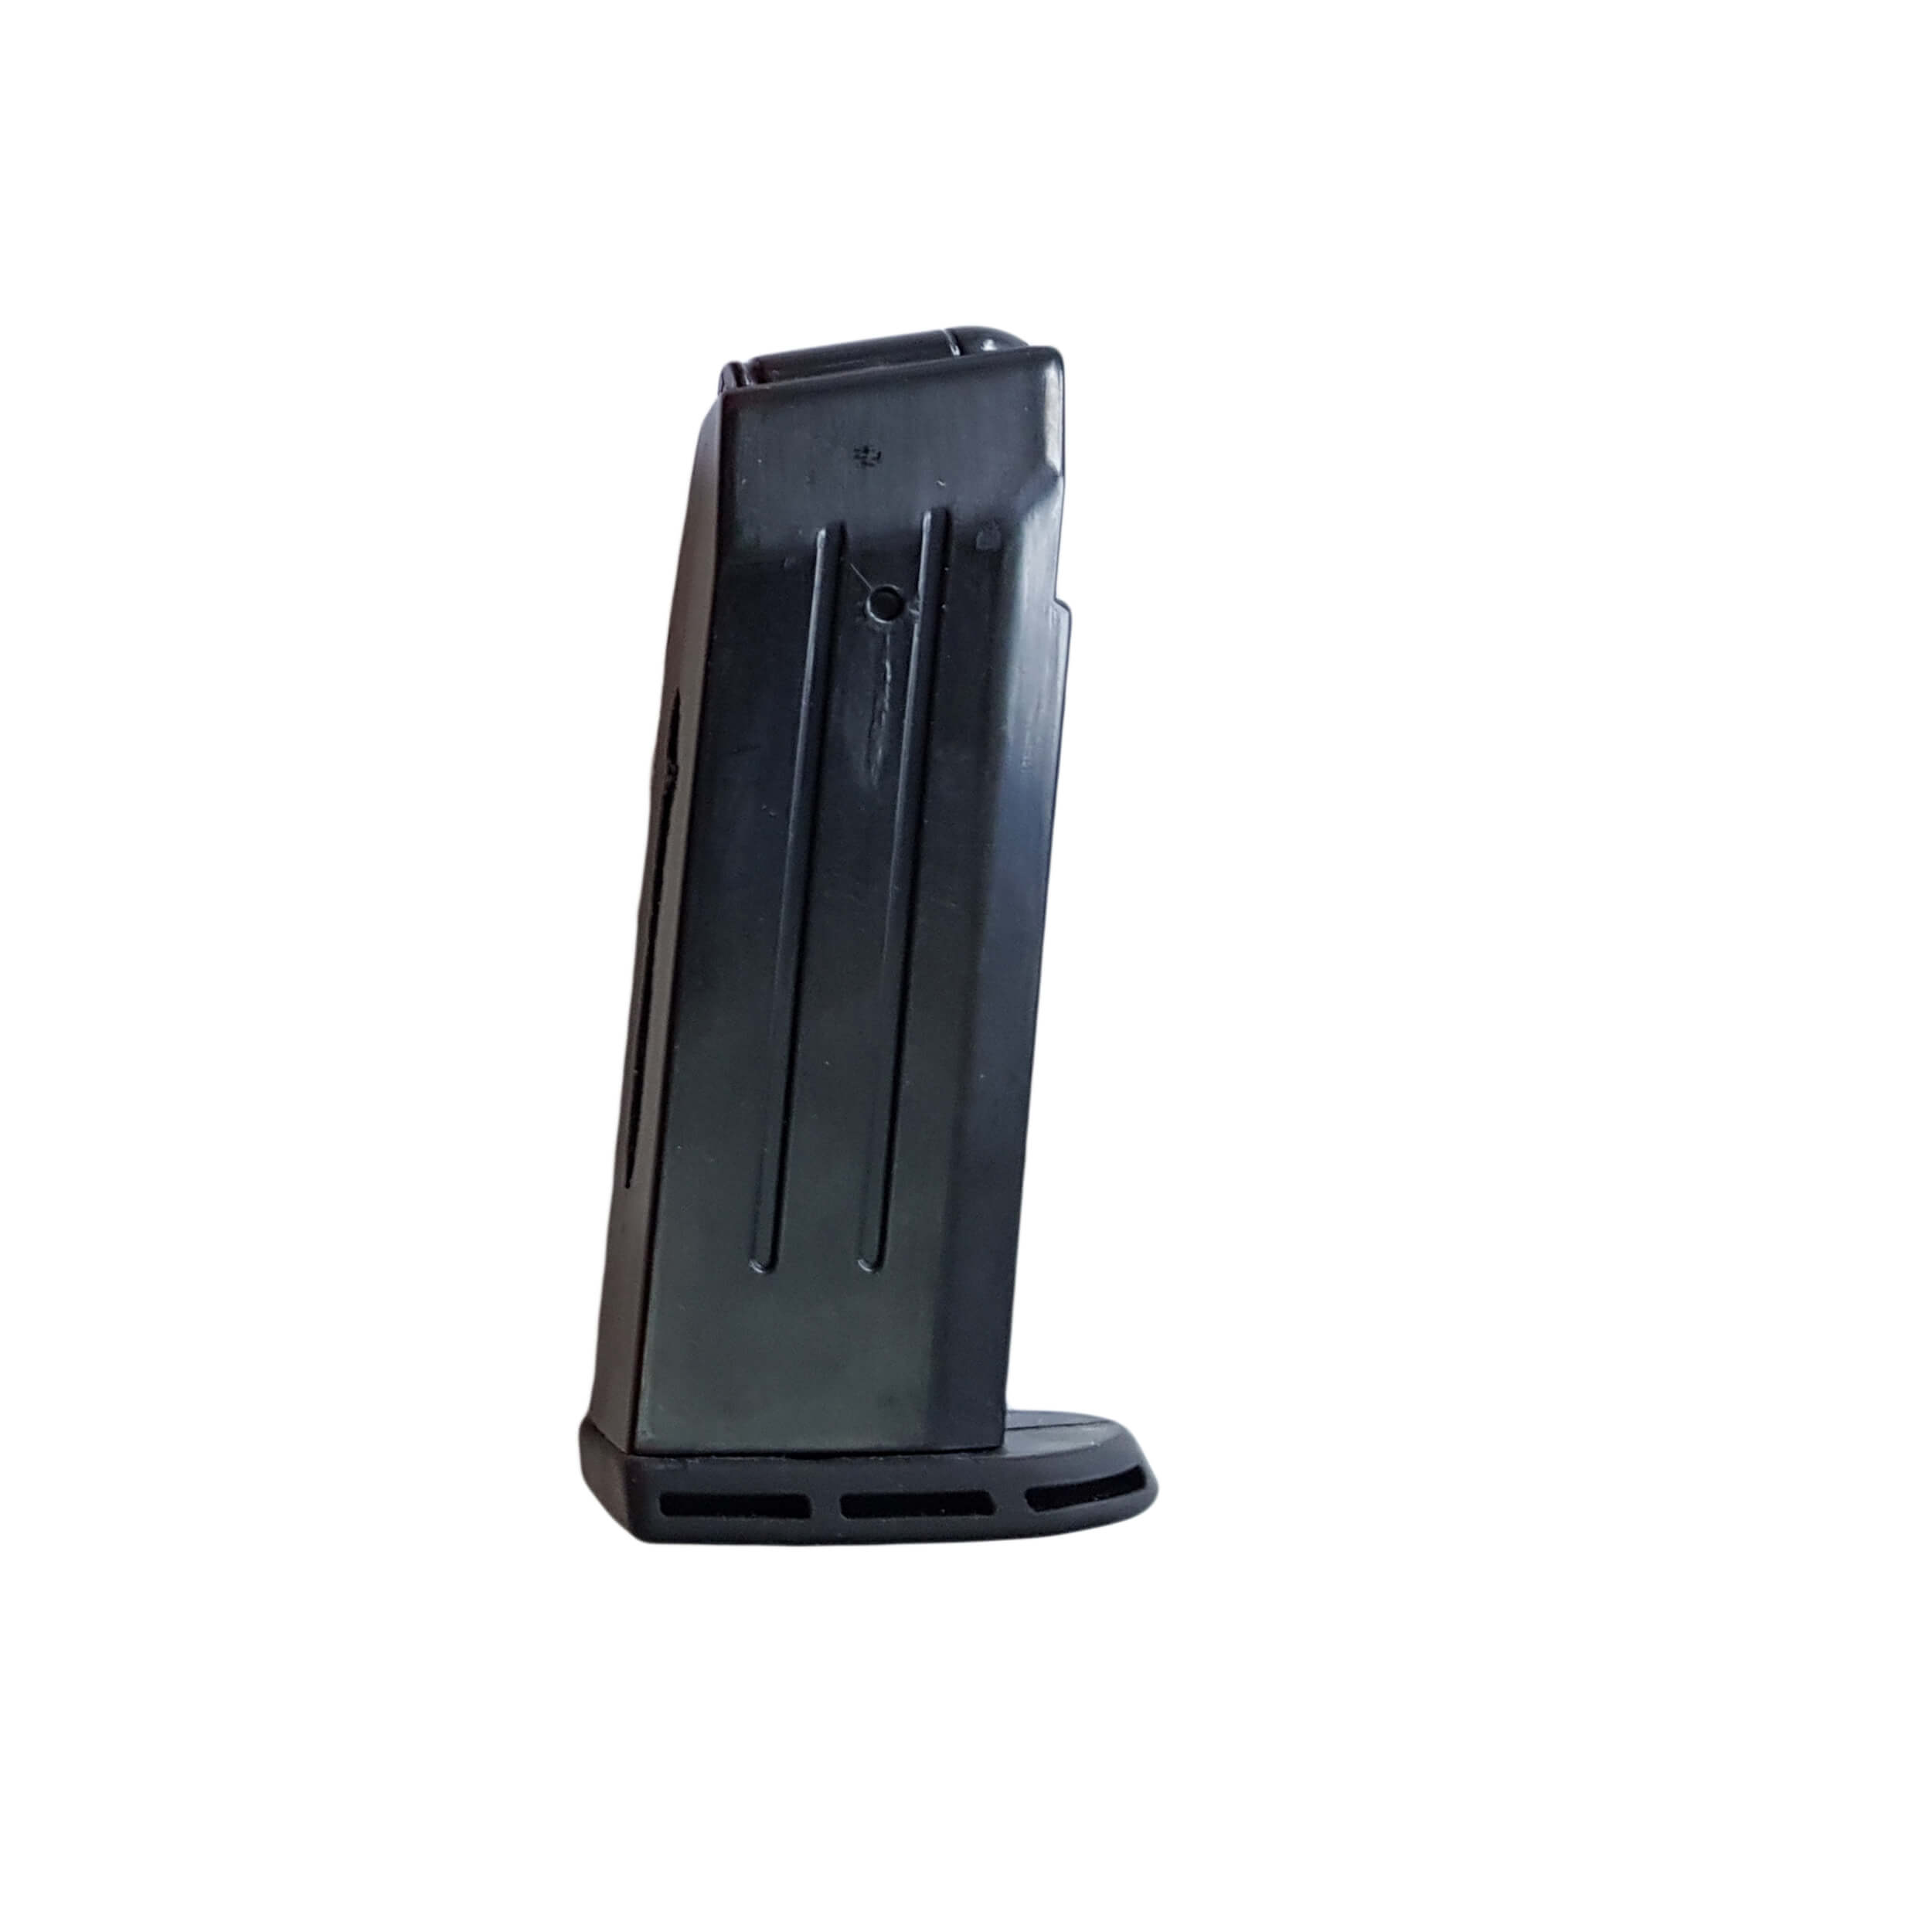 SF25-MAG Replacement Magazine for Laser Training Pistol